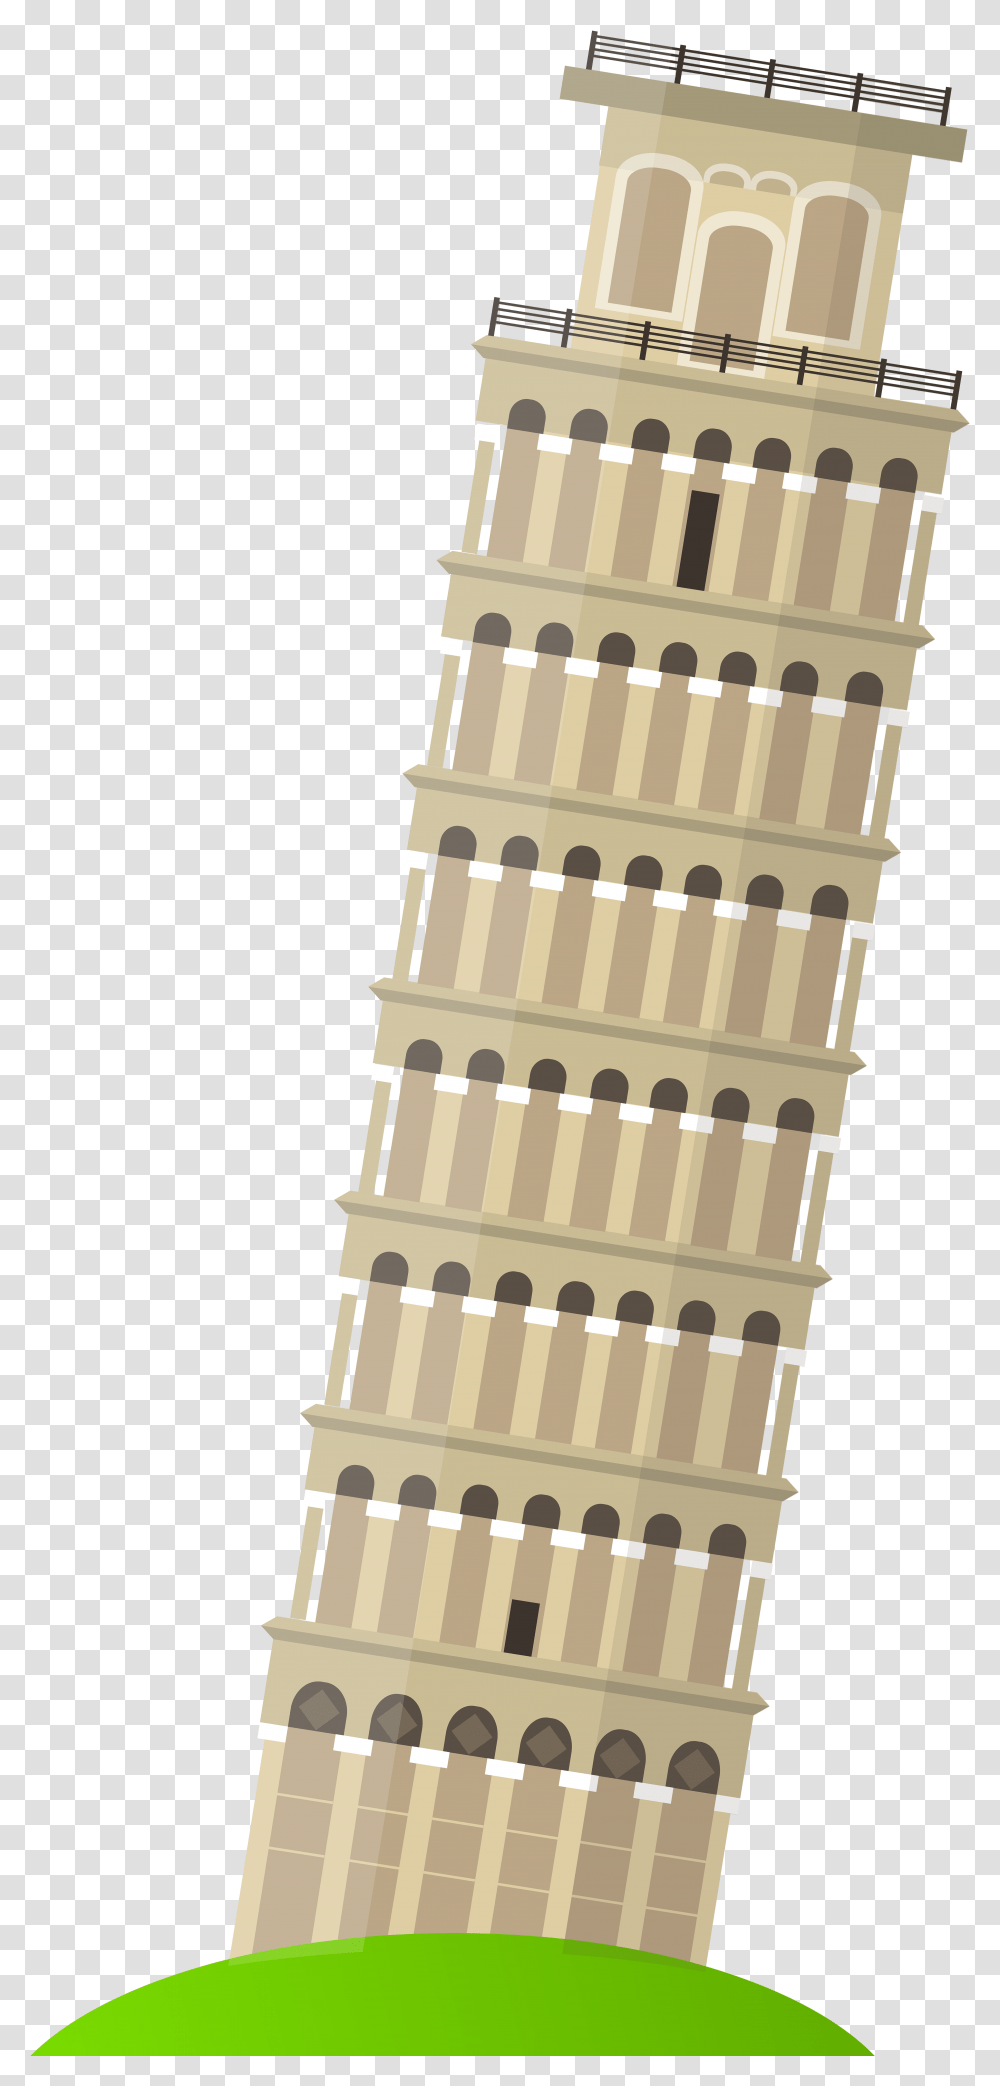 Leaning Tower Of Pisa Clip Art Leaning Tower Of Pisa Clipart, Architecture, Building, Spire, Wedding Cake Transparent Png